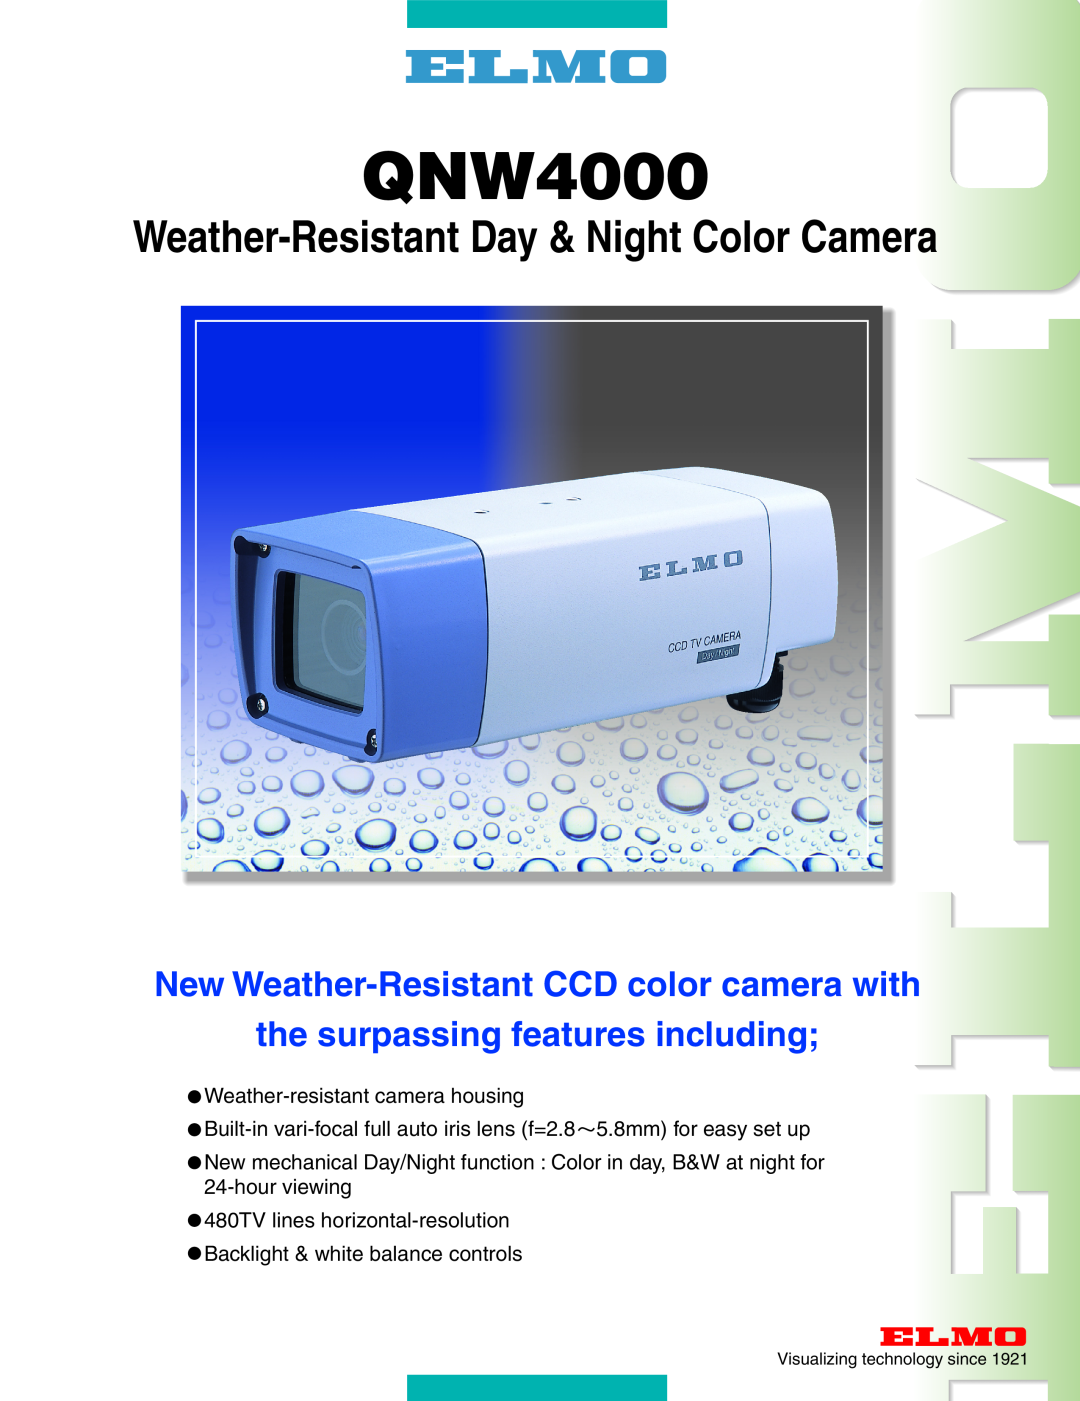 Elmo QNW4000 manual Weather-Resistant Day & Night Color Camera, New Weather-Resistant CCD color camera with 